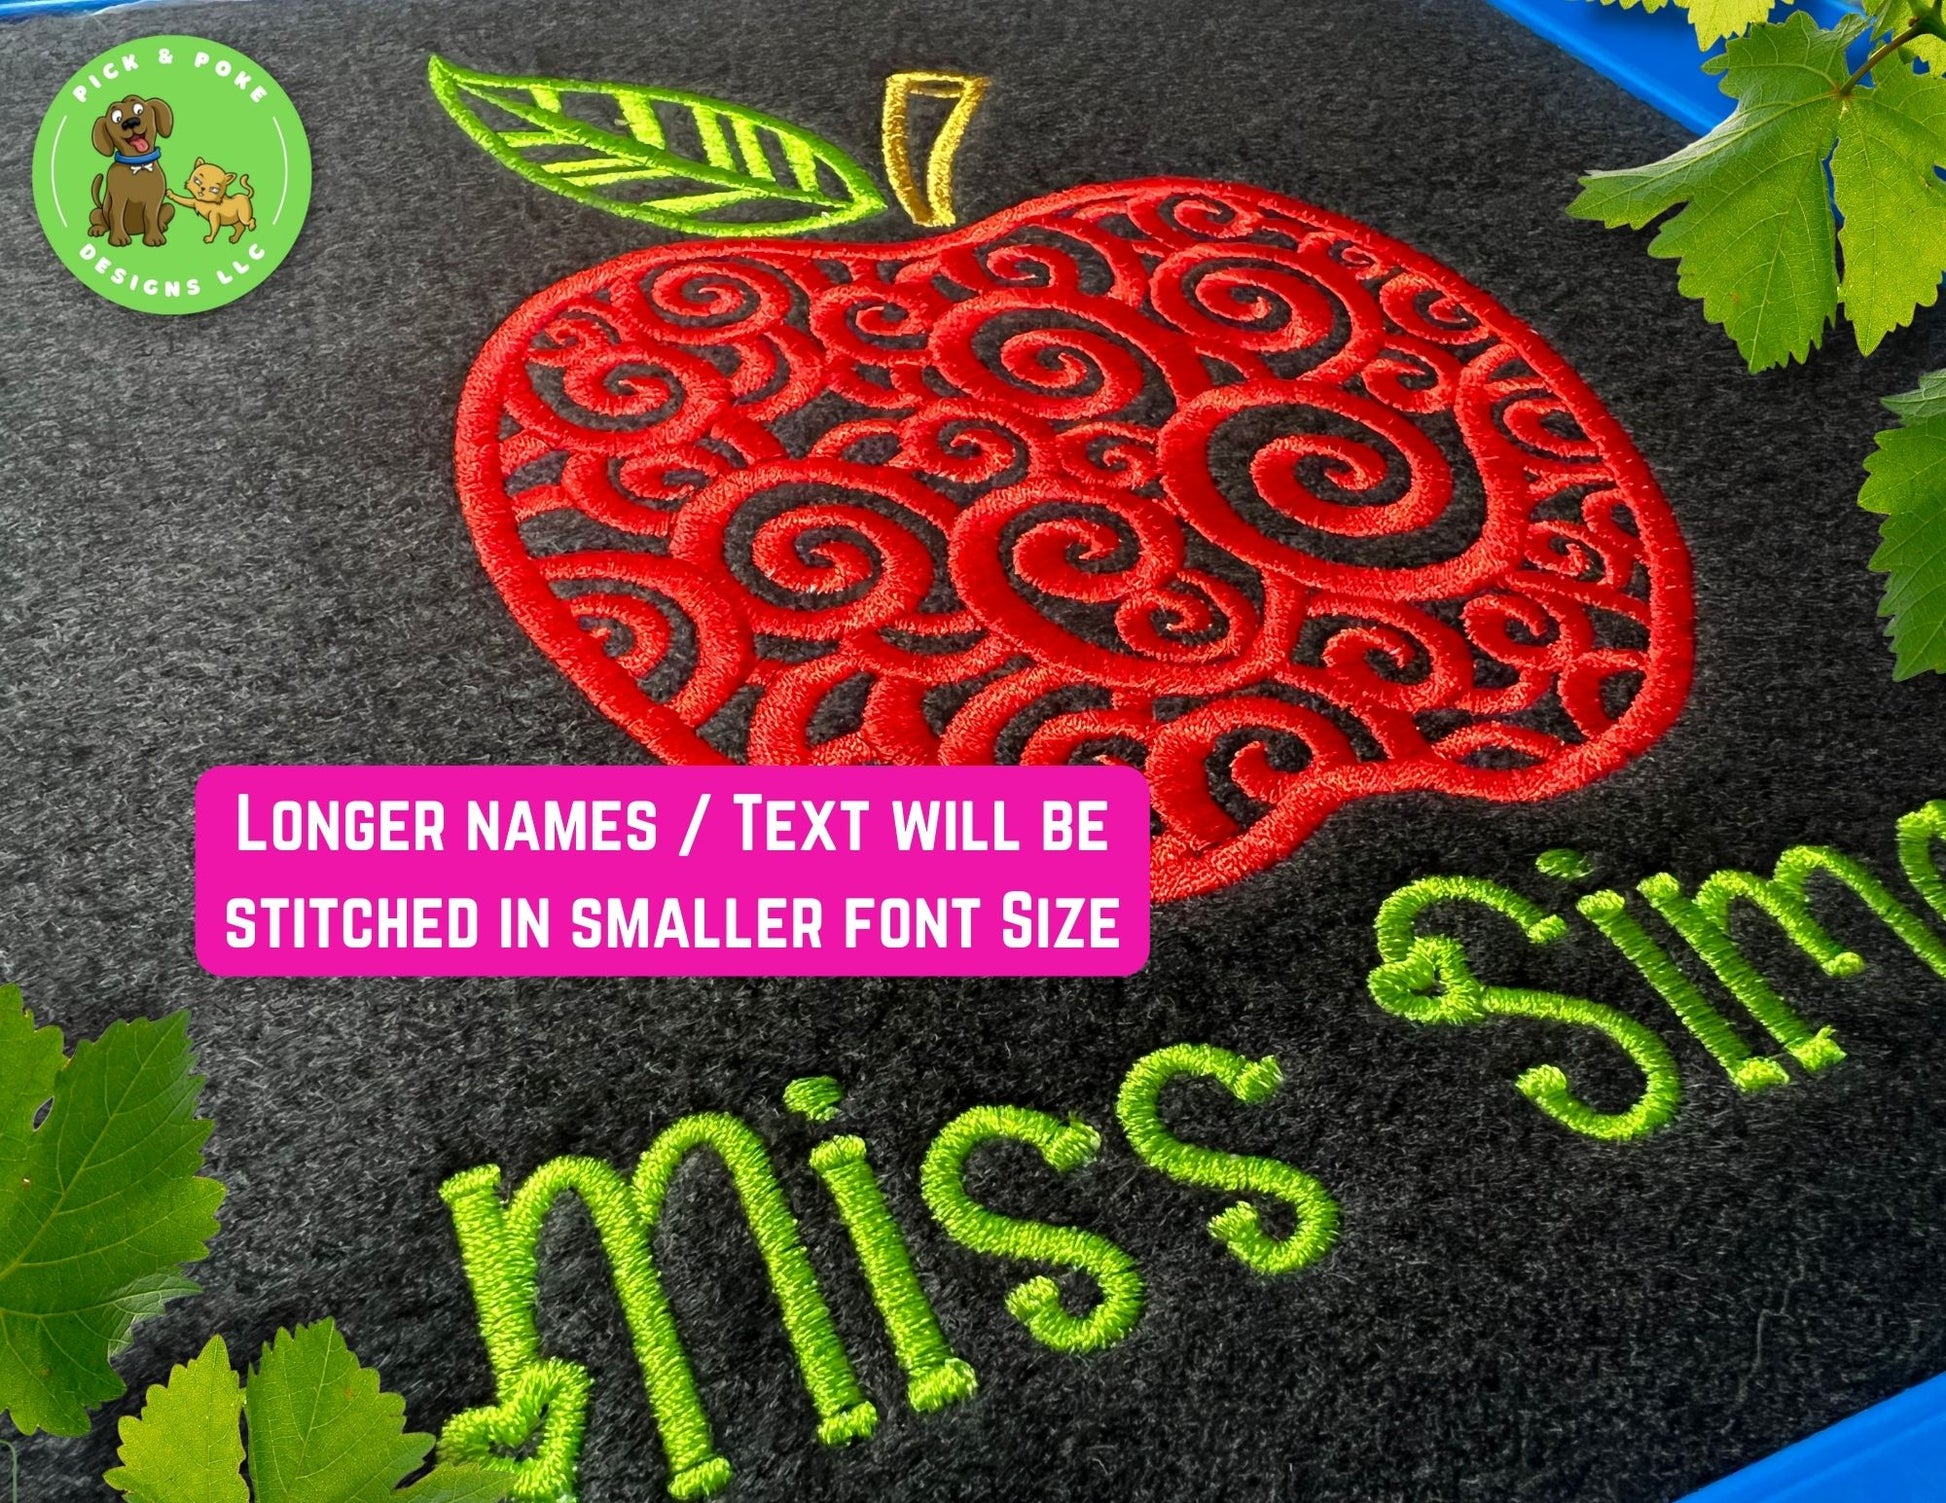 Longer names and text will be stitched in s smaller font size